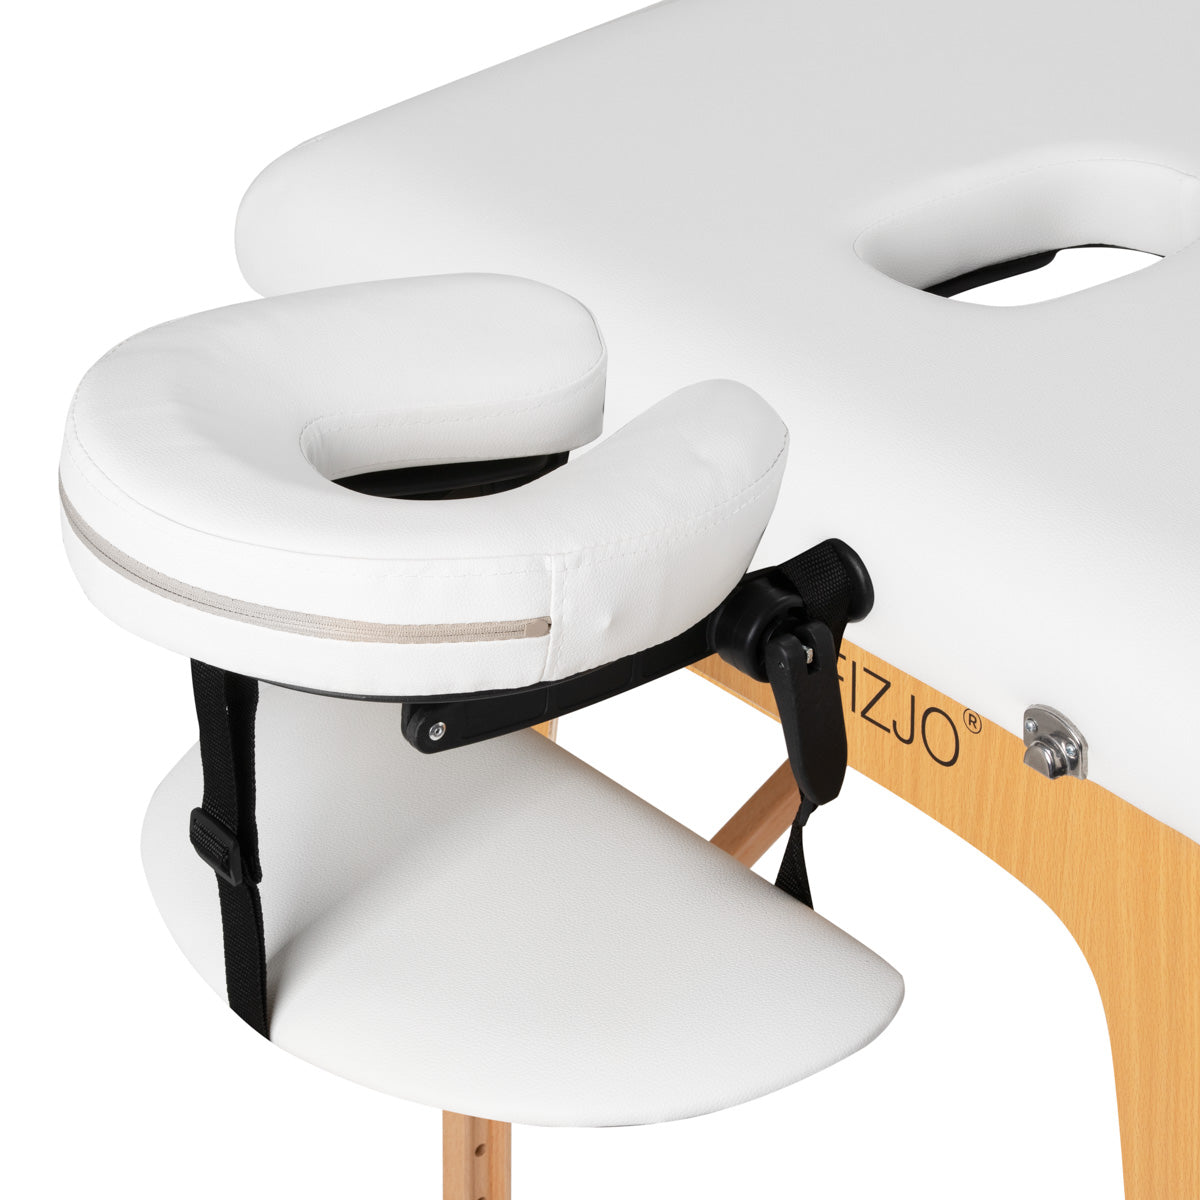 WOODEN FOLDING MASSAGE TABLE COMFORT ACTIV FIZJO LUX 2-SECTIONS 190X70 WHITE